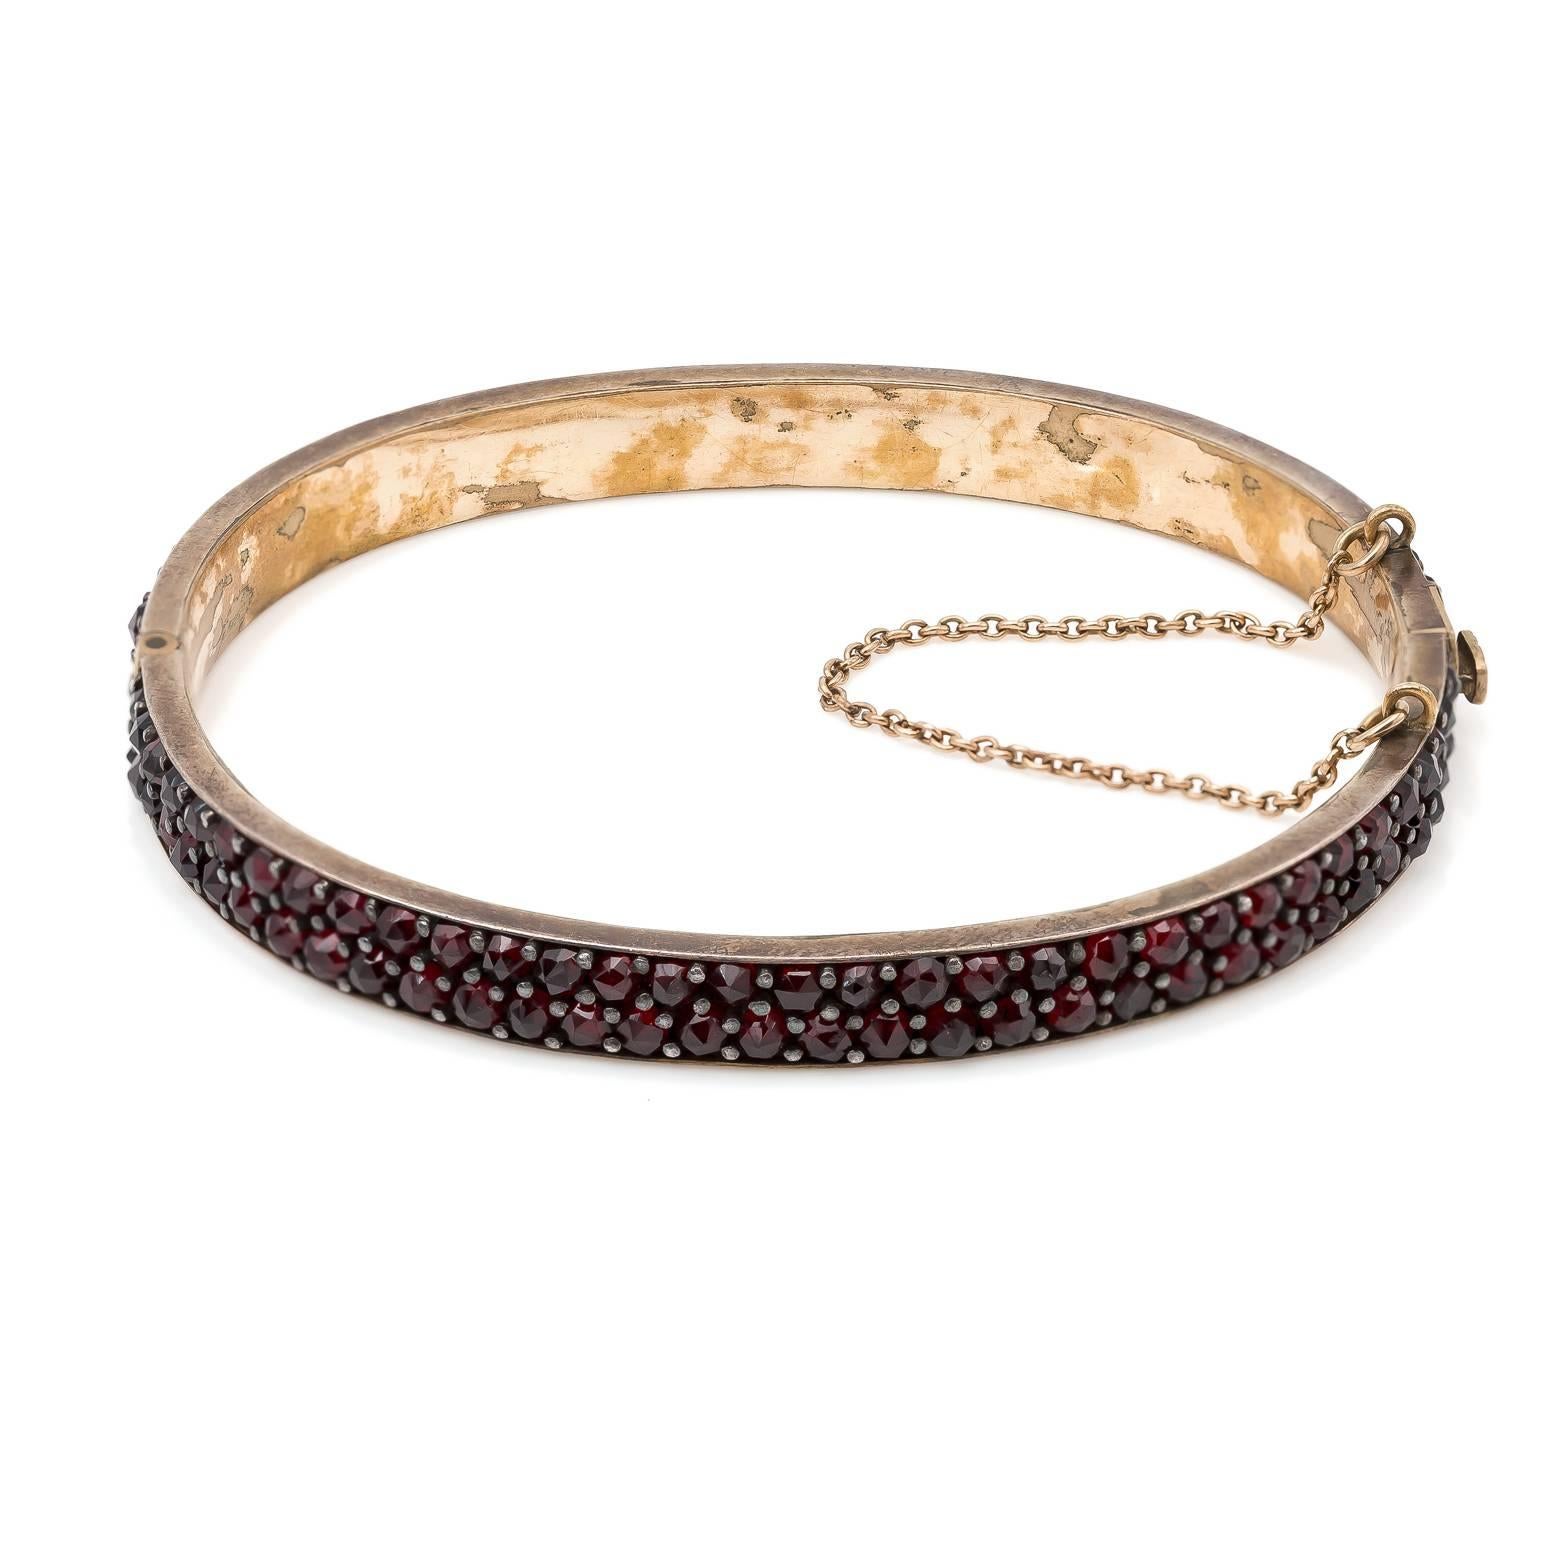  This garnet bangle was hand crafted in the 1880's and the workmanship is flawless. The garnets are perfectly matched in color and clarity. The comfort is exceptional as well.. The shape of the bangle is oval and has a very secure clasp and safety